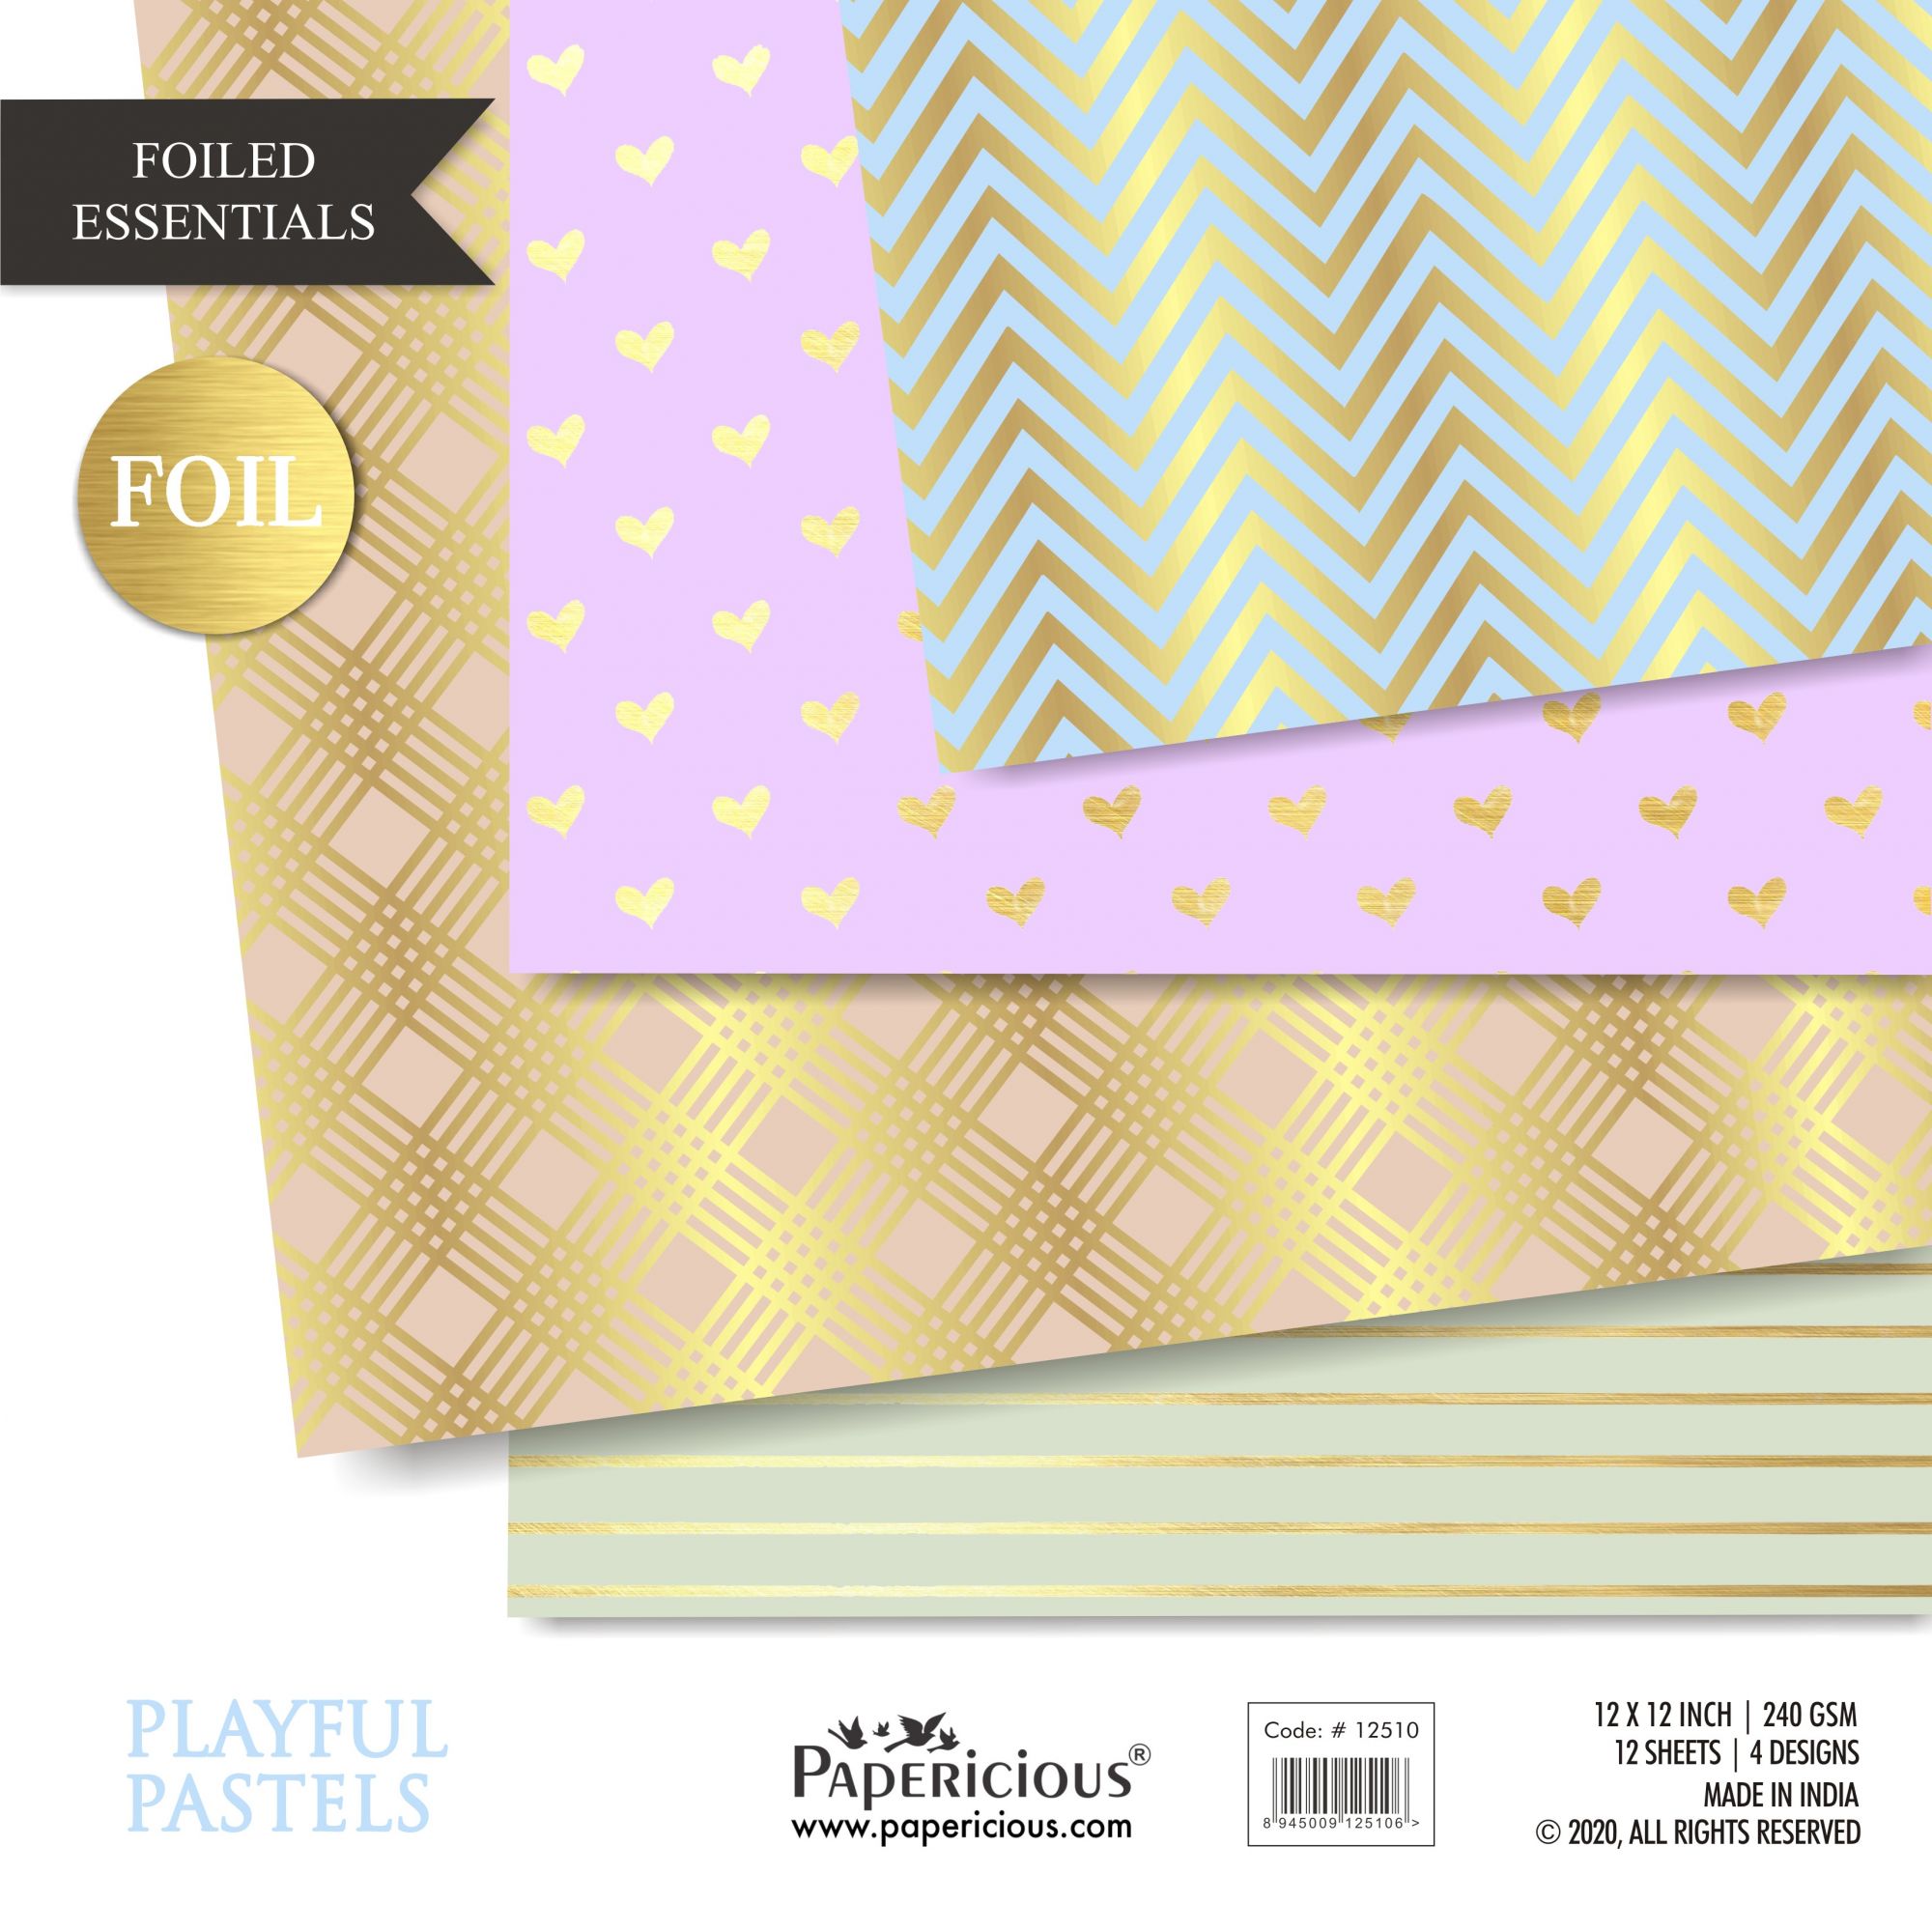 Playful Pastels - Golden Foiled Pattern Papers 12x12 inch